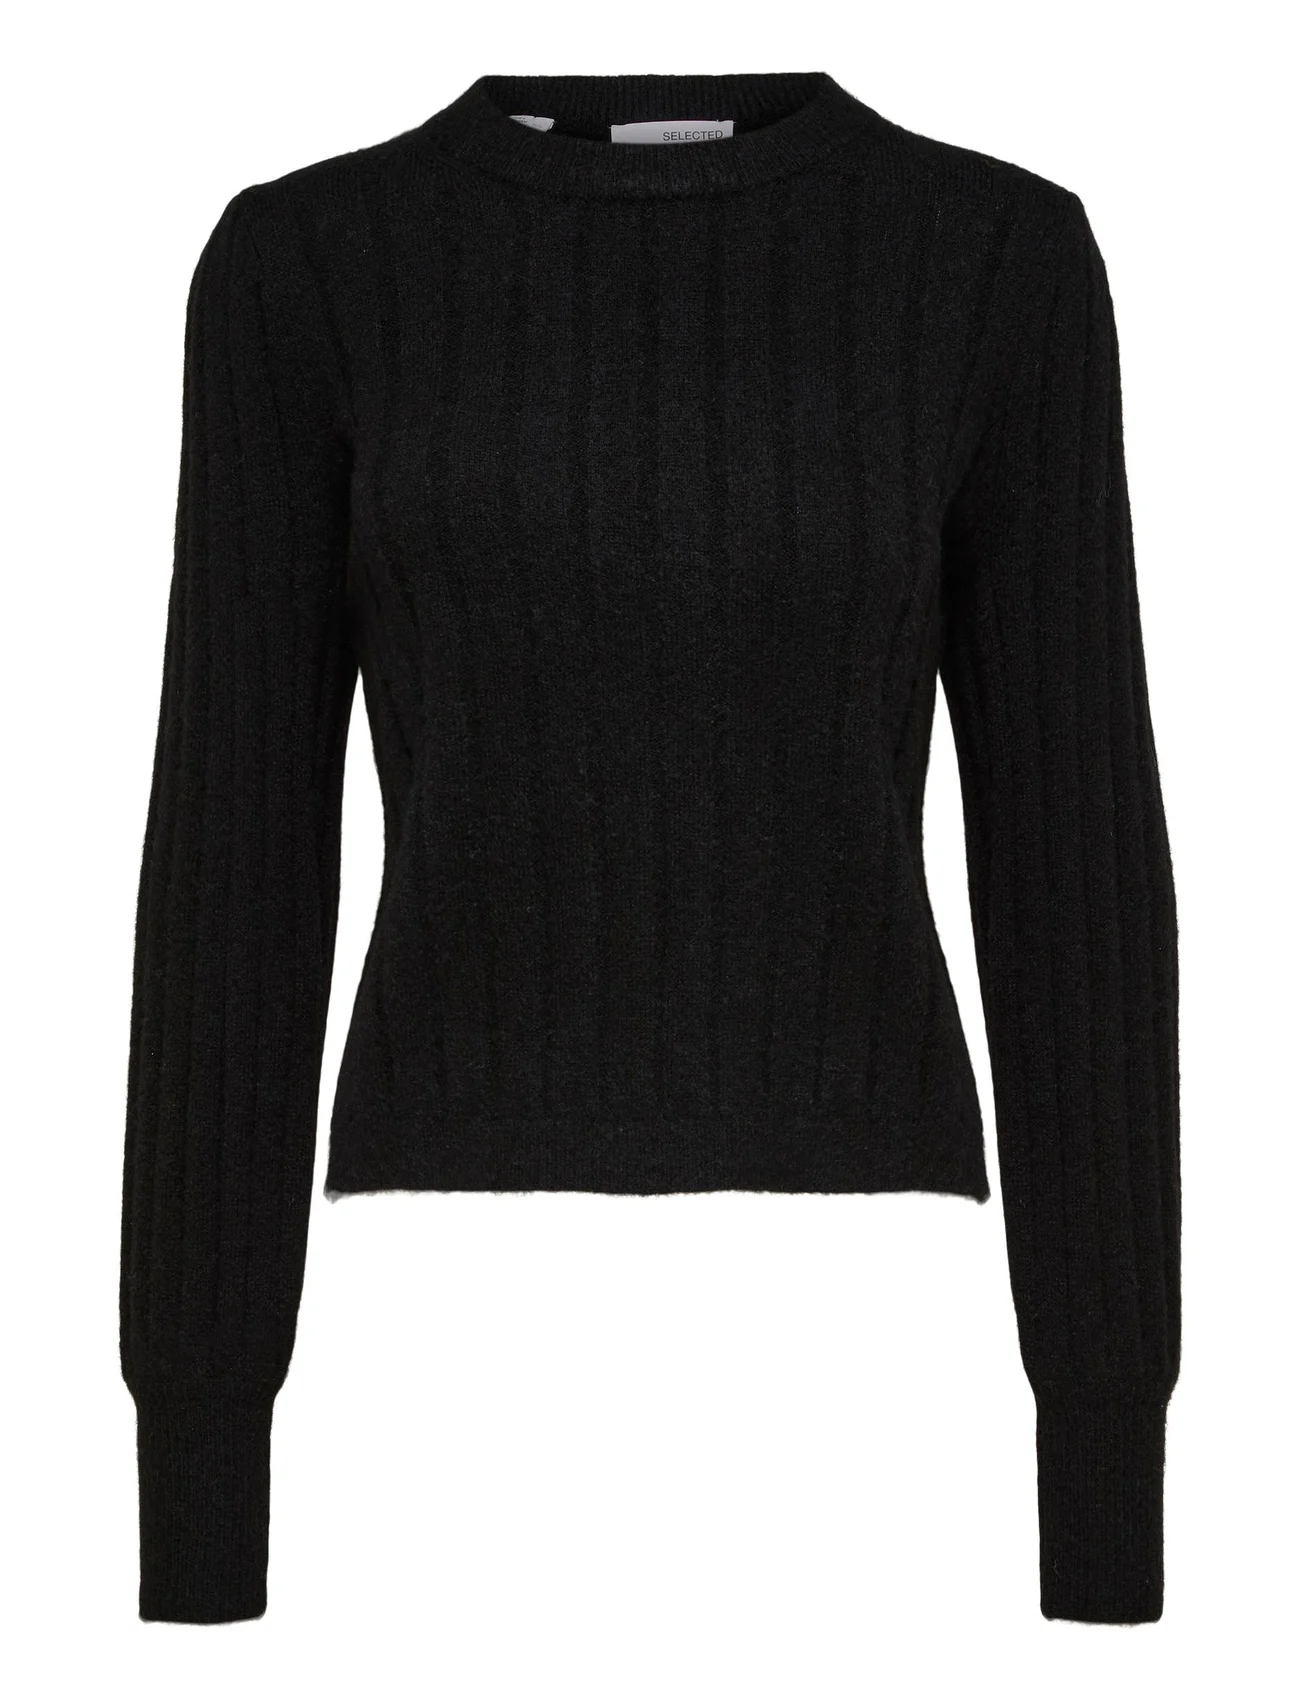 Selected Femme - SLFGLOWIE LS KNIT O-NECK B - jumpers - black - 0